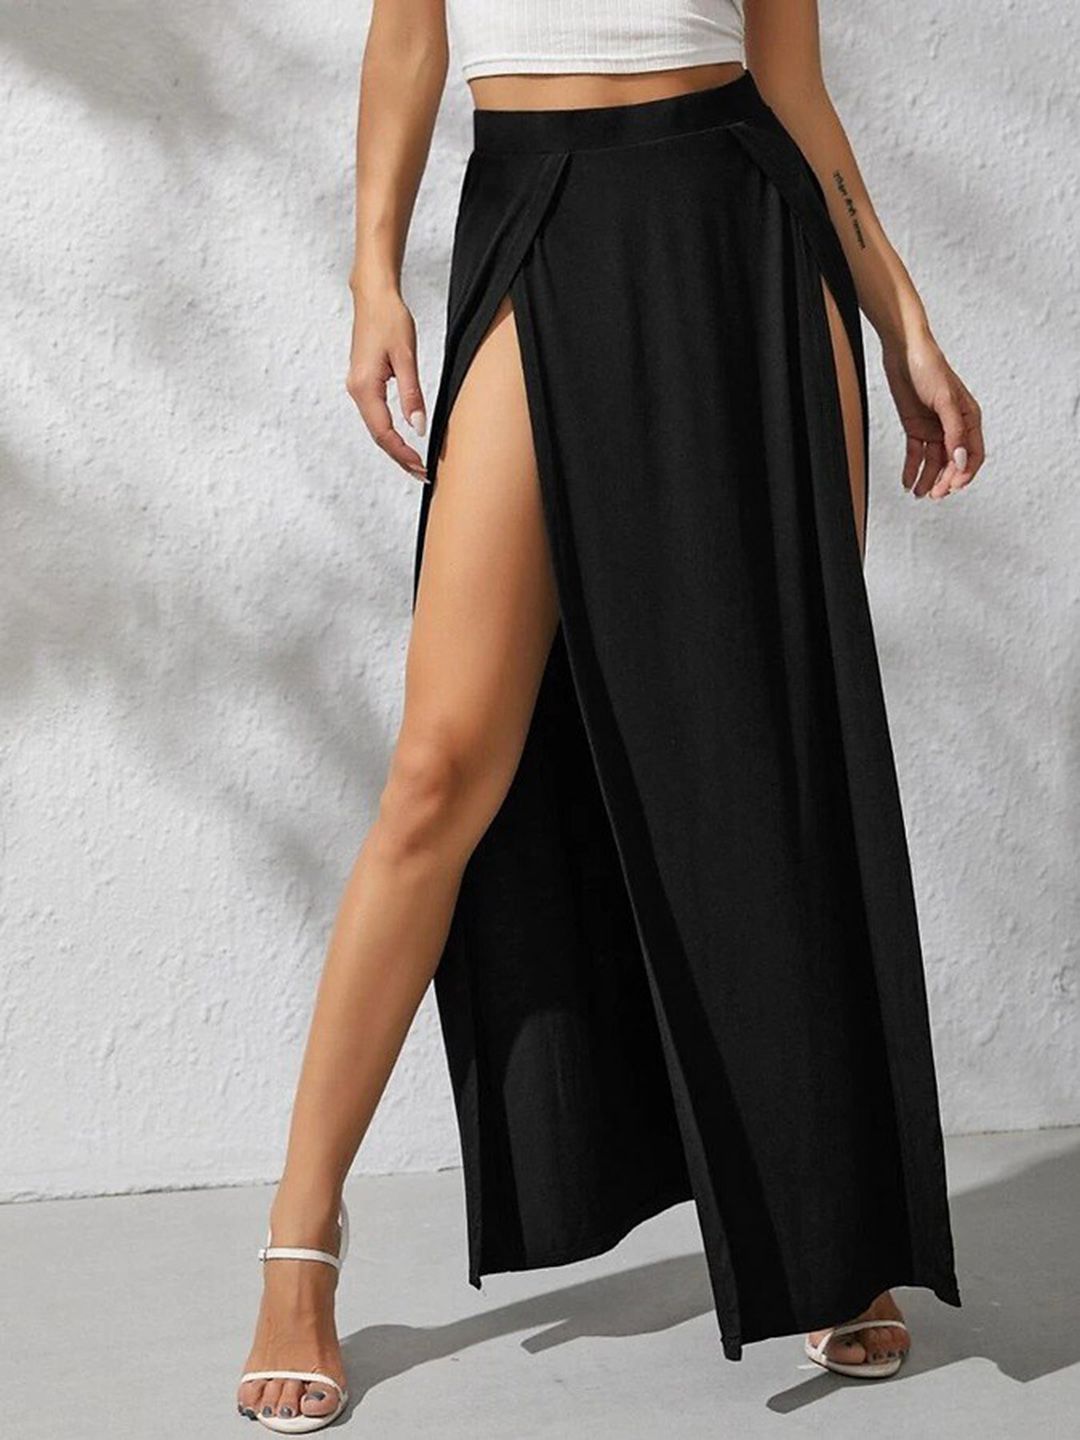 StyleAsh Straight Front Slit Maxi Skirt Price in India